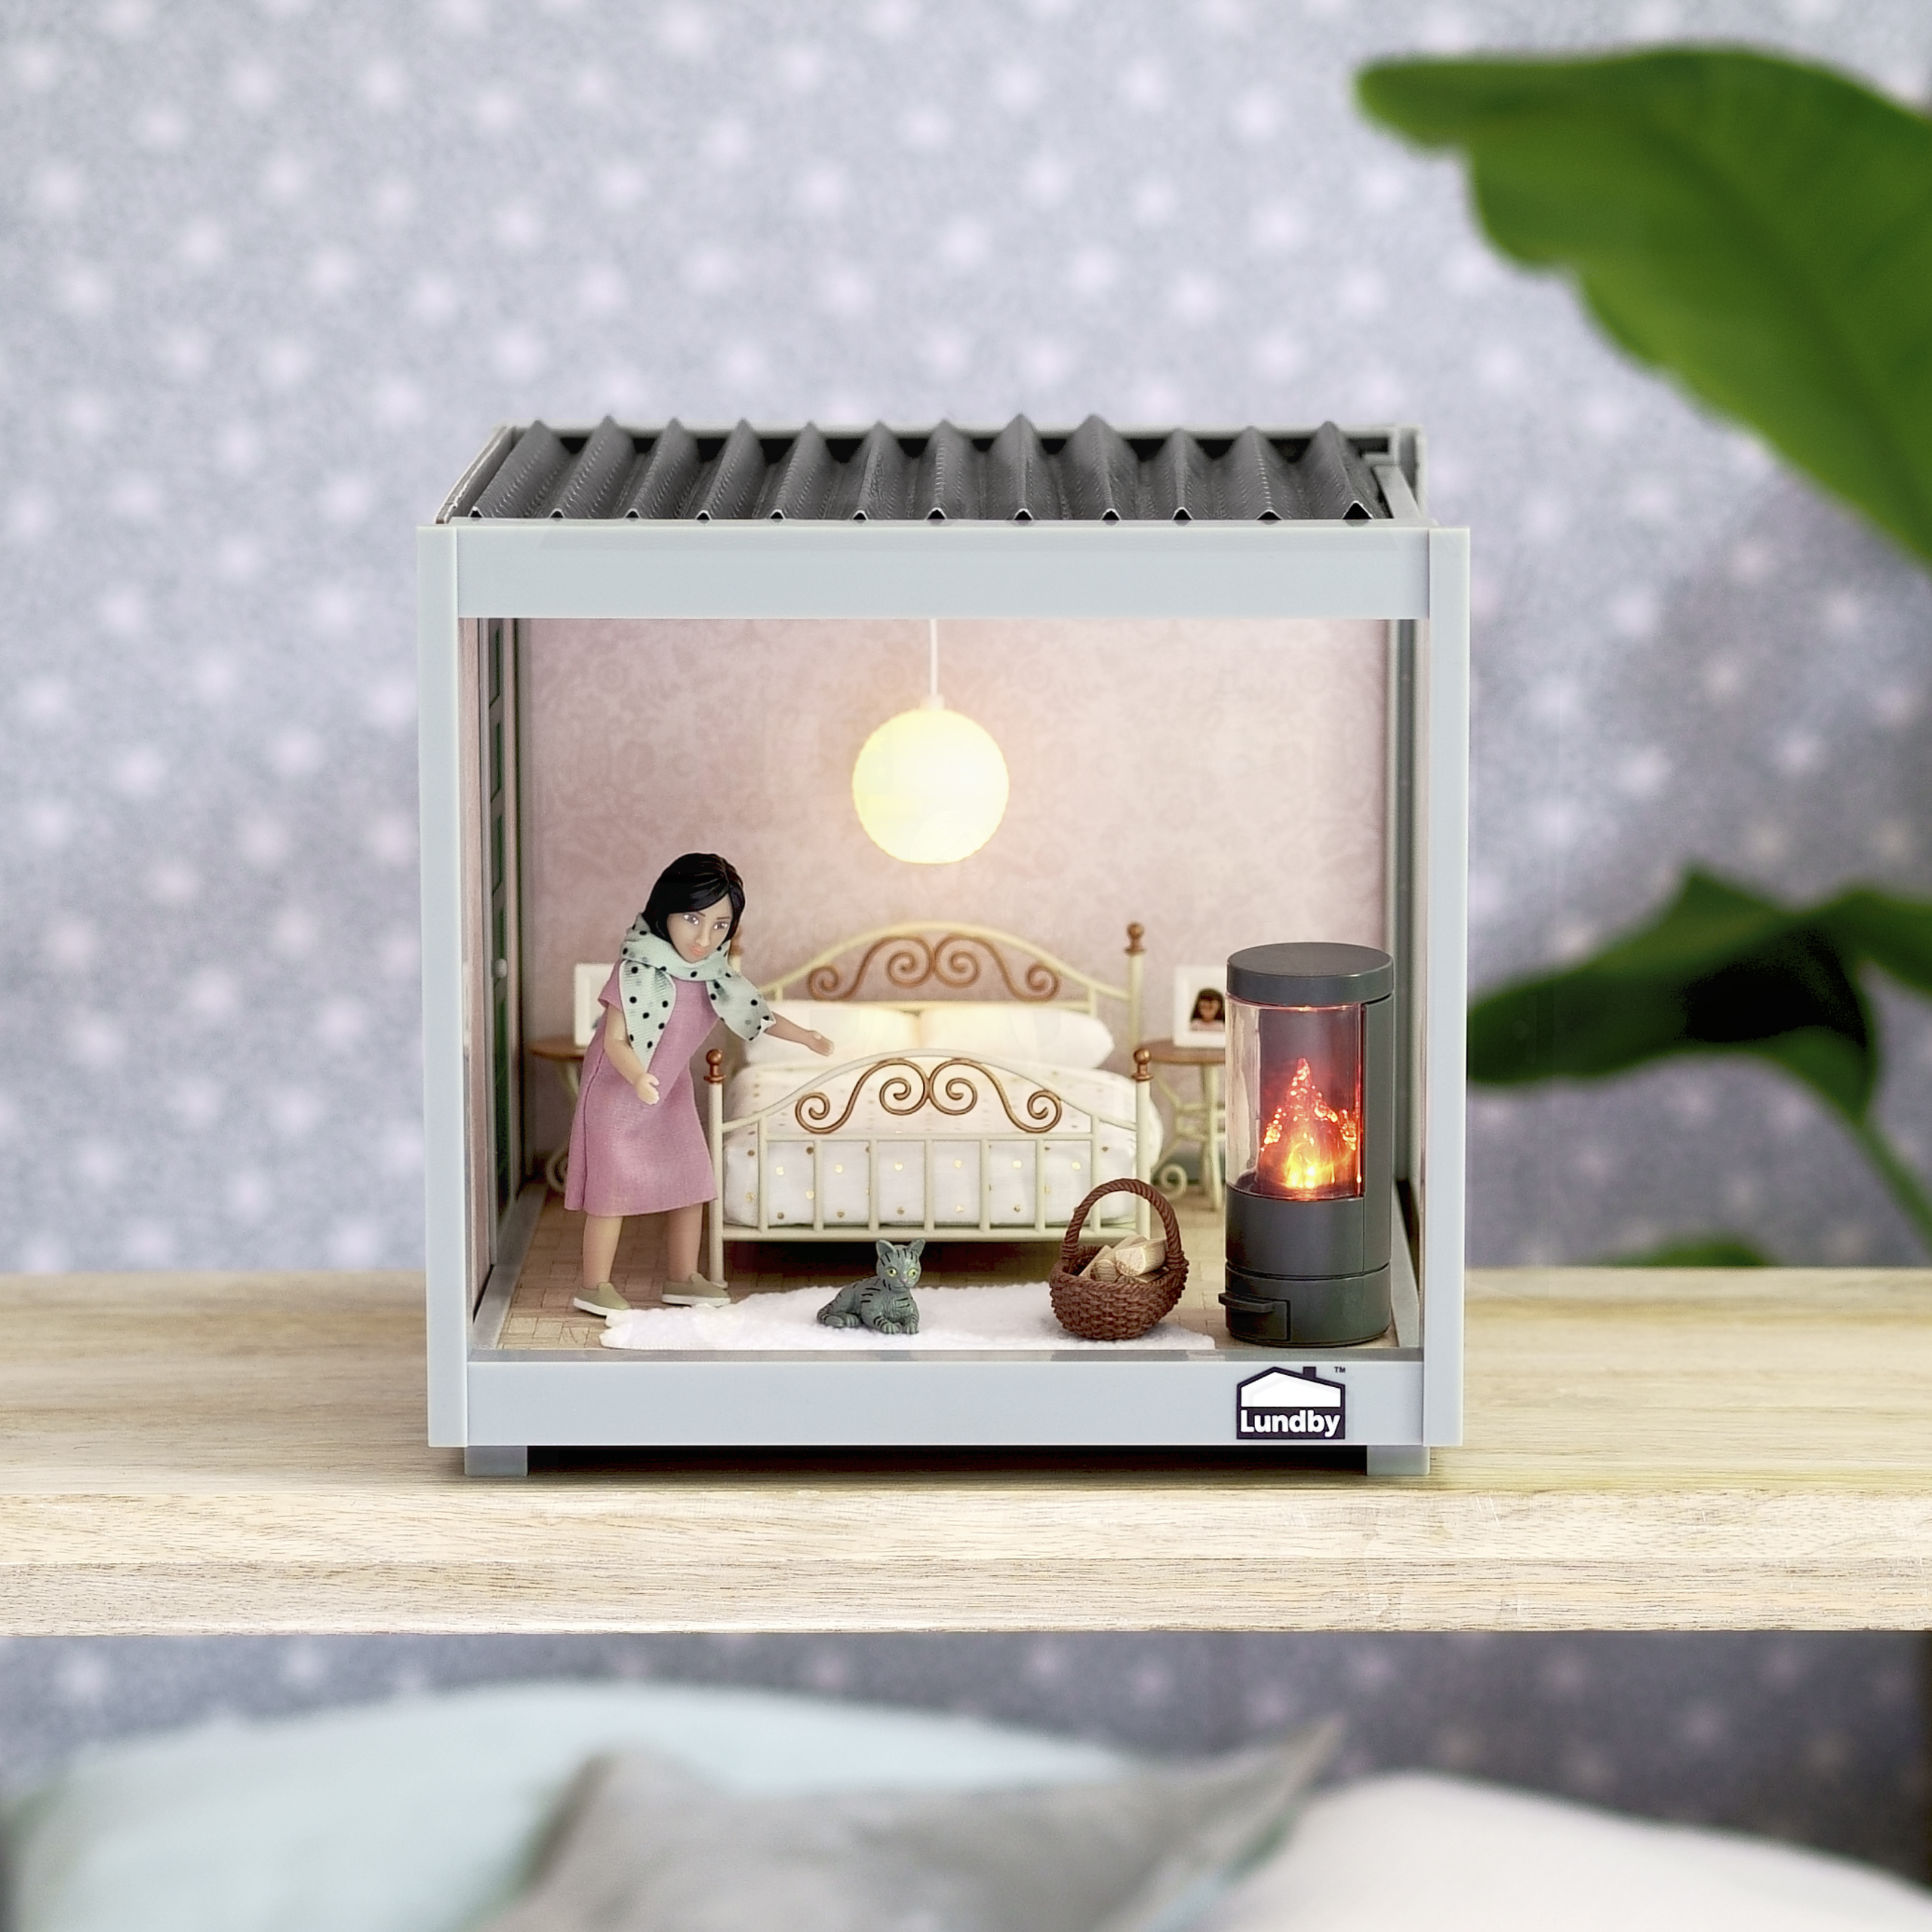 Doll house furniture & doll house accessories lundby dollhouse furniture log burner set with lighting